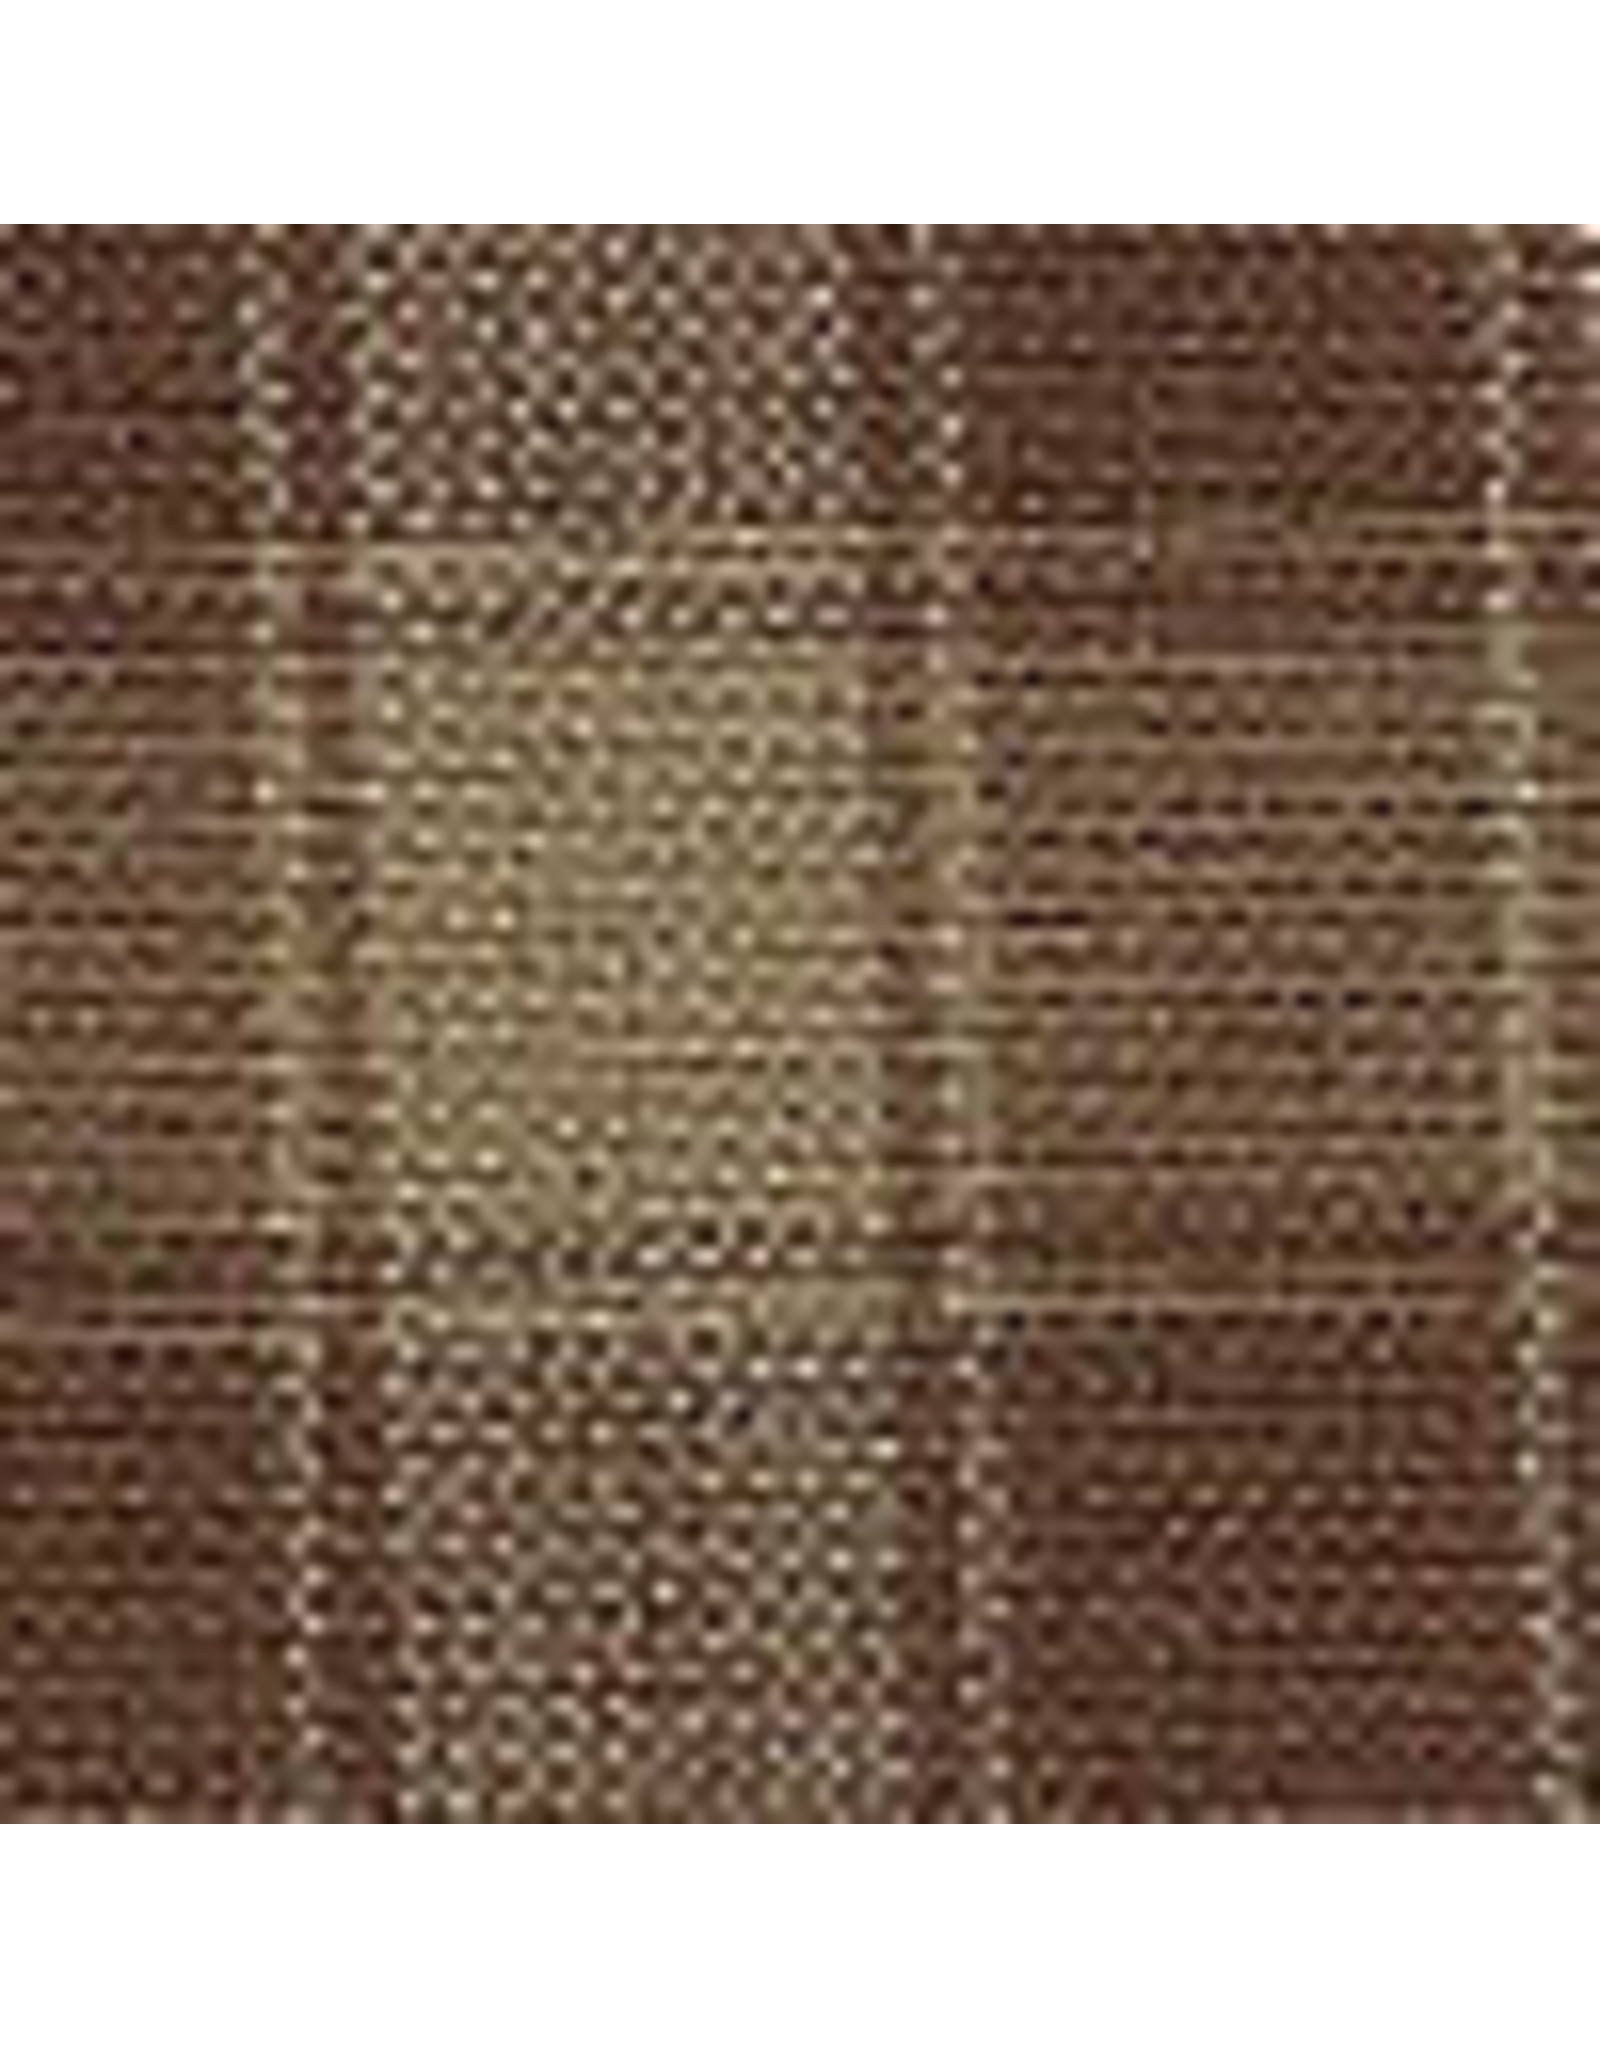 Yd. Brown and Tan House Check Fabric #94